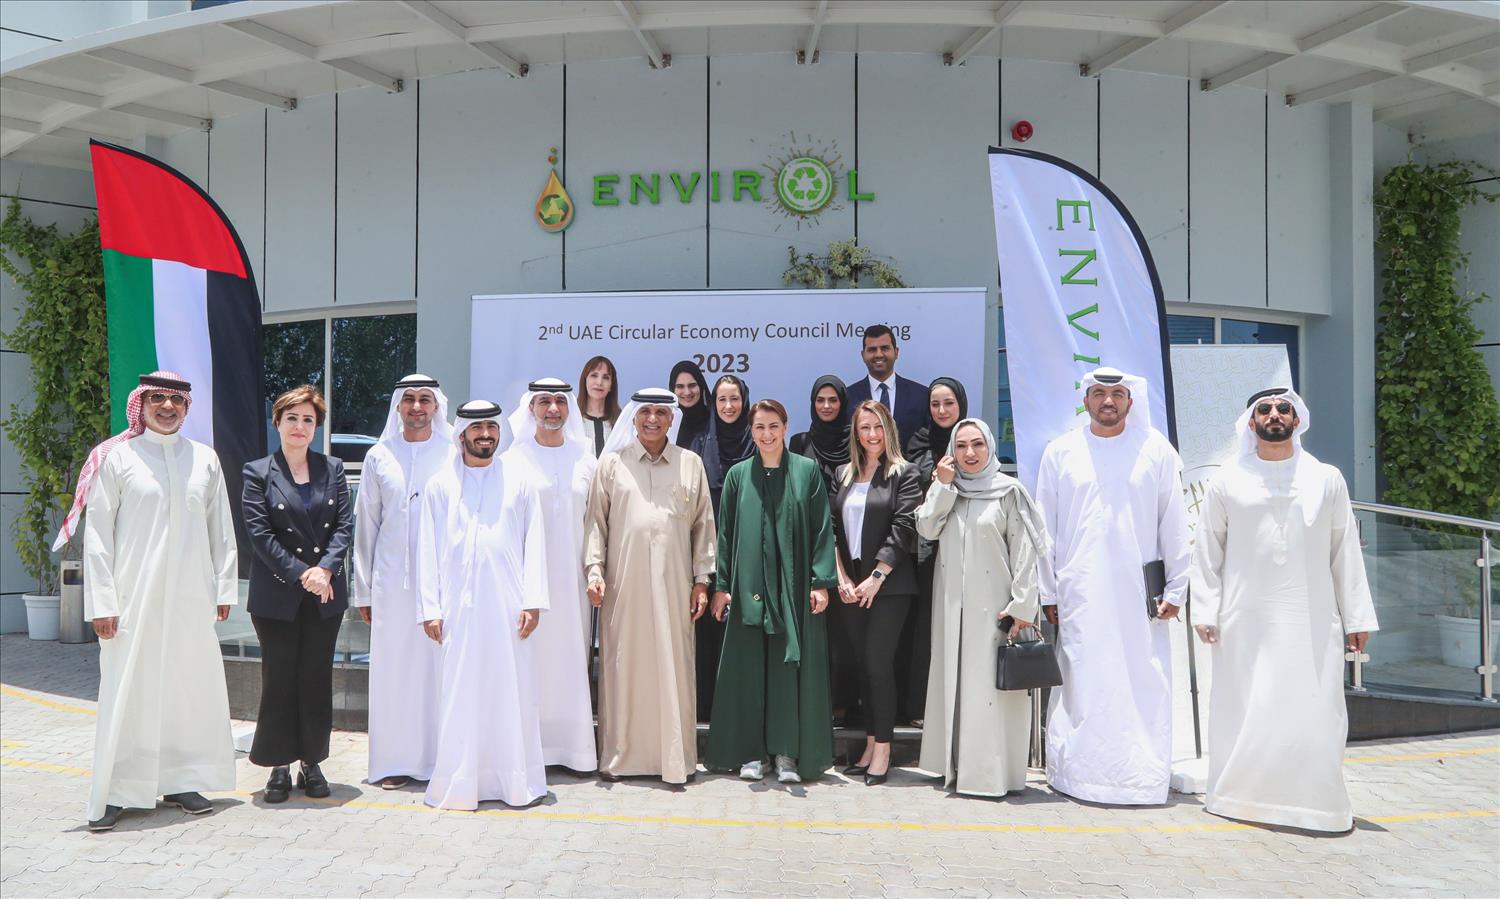 UAE Council For Circular Economy Discusses Ways To Accelerate And Enhance Manufacturing, Food, Infrastructure, And Transport Efforts